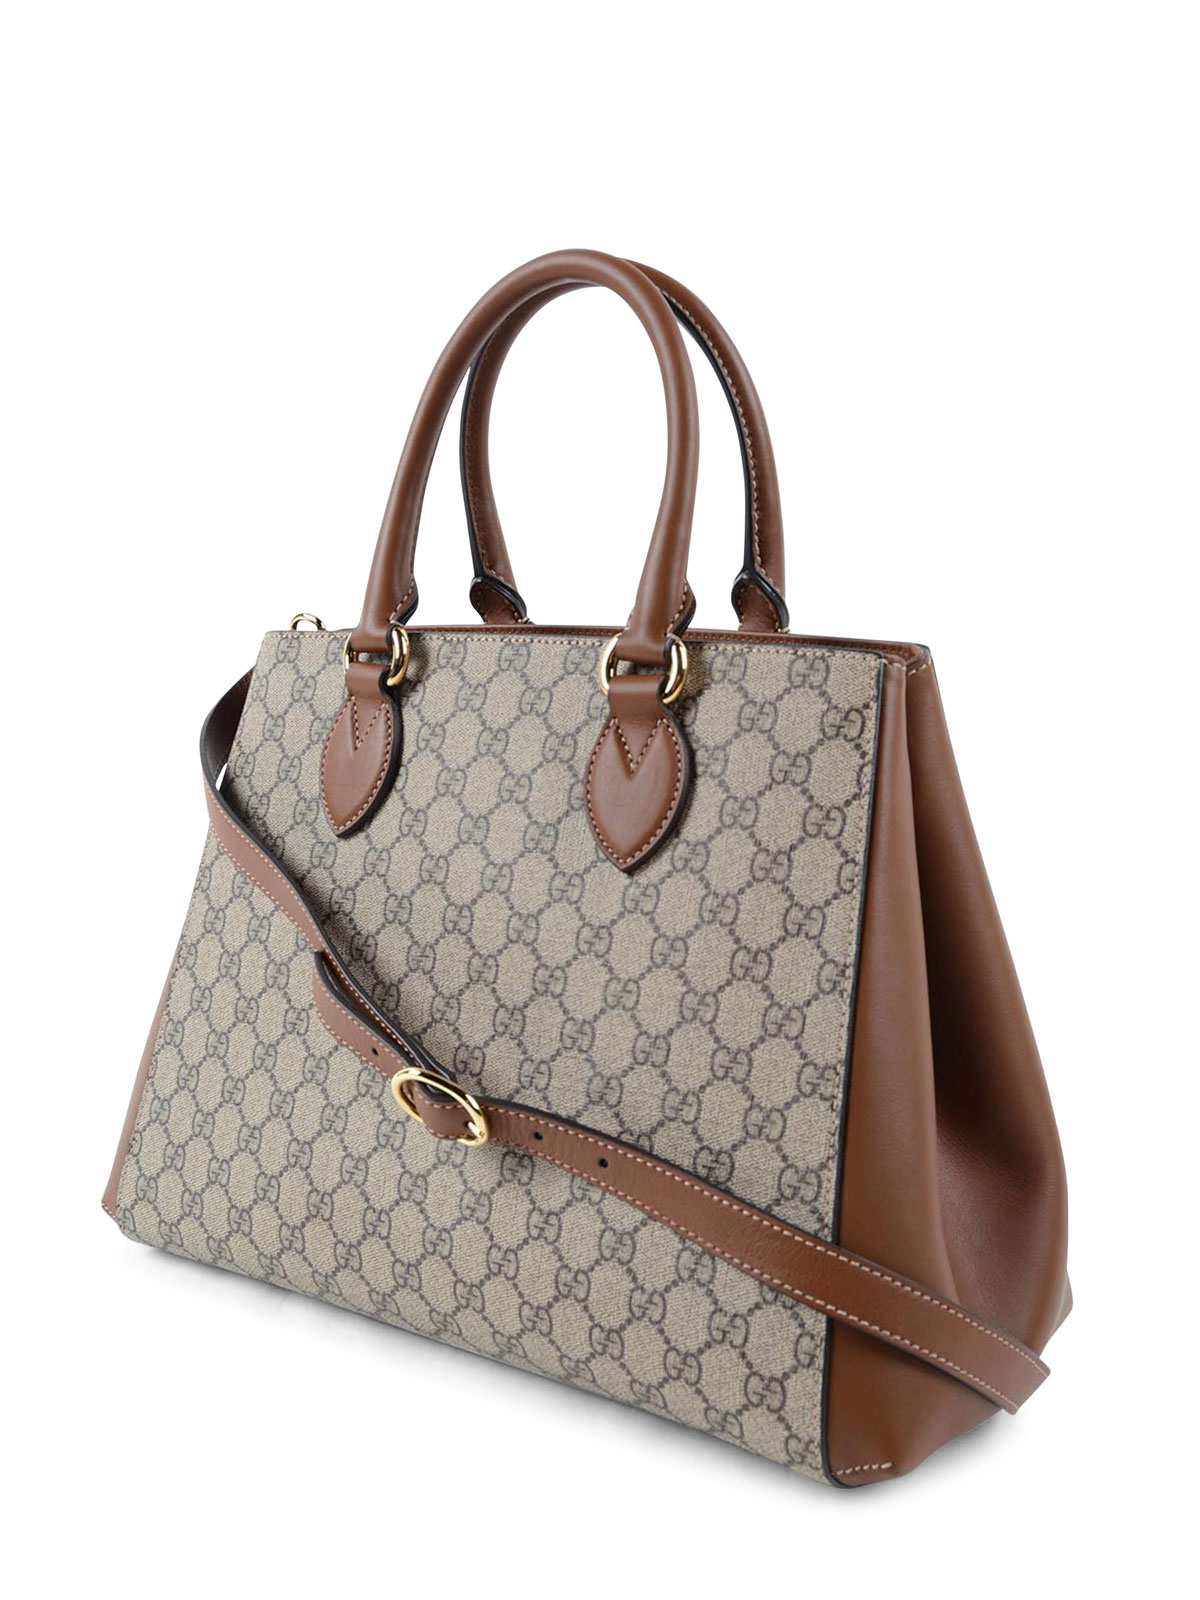 GG Supreme and leather tote bag by Gucci - totes bags | iKRIX